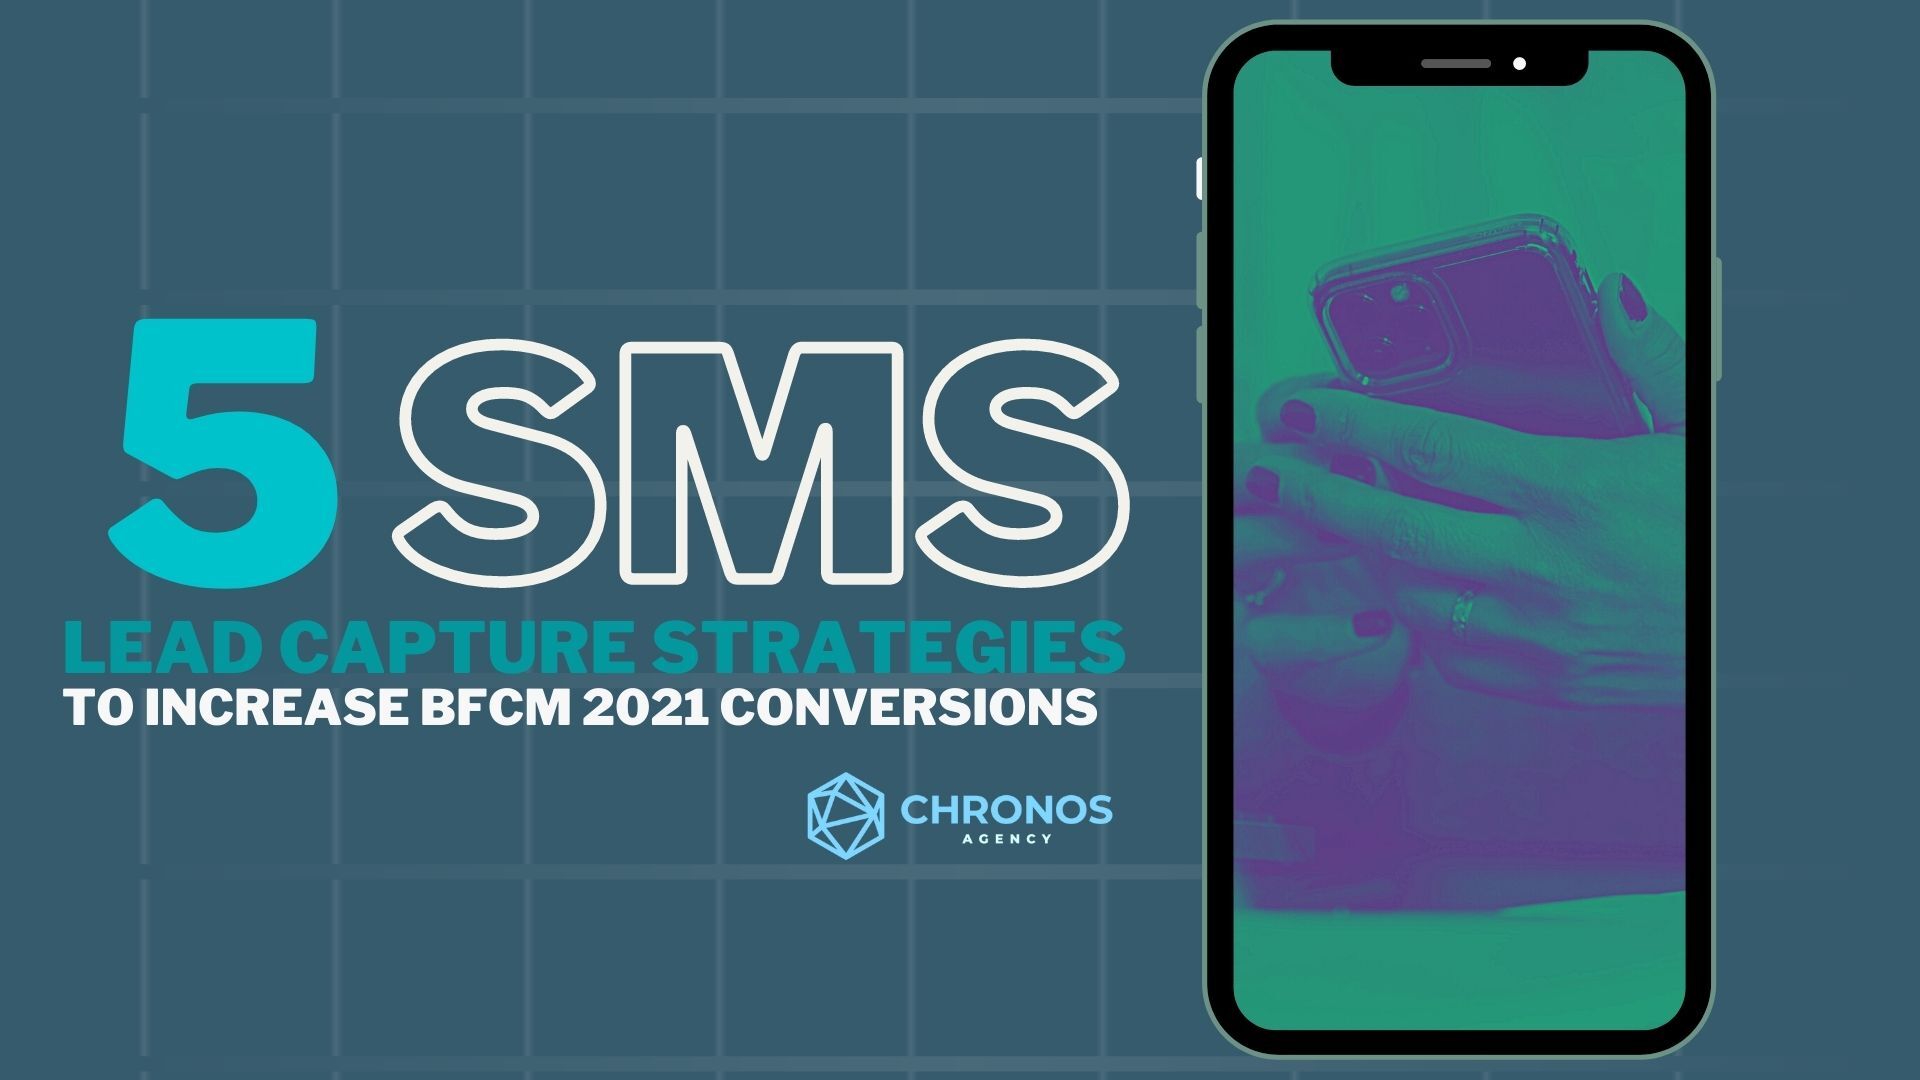 sms lead capture strategies chronos featured